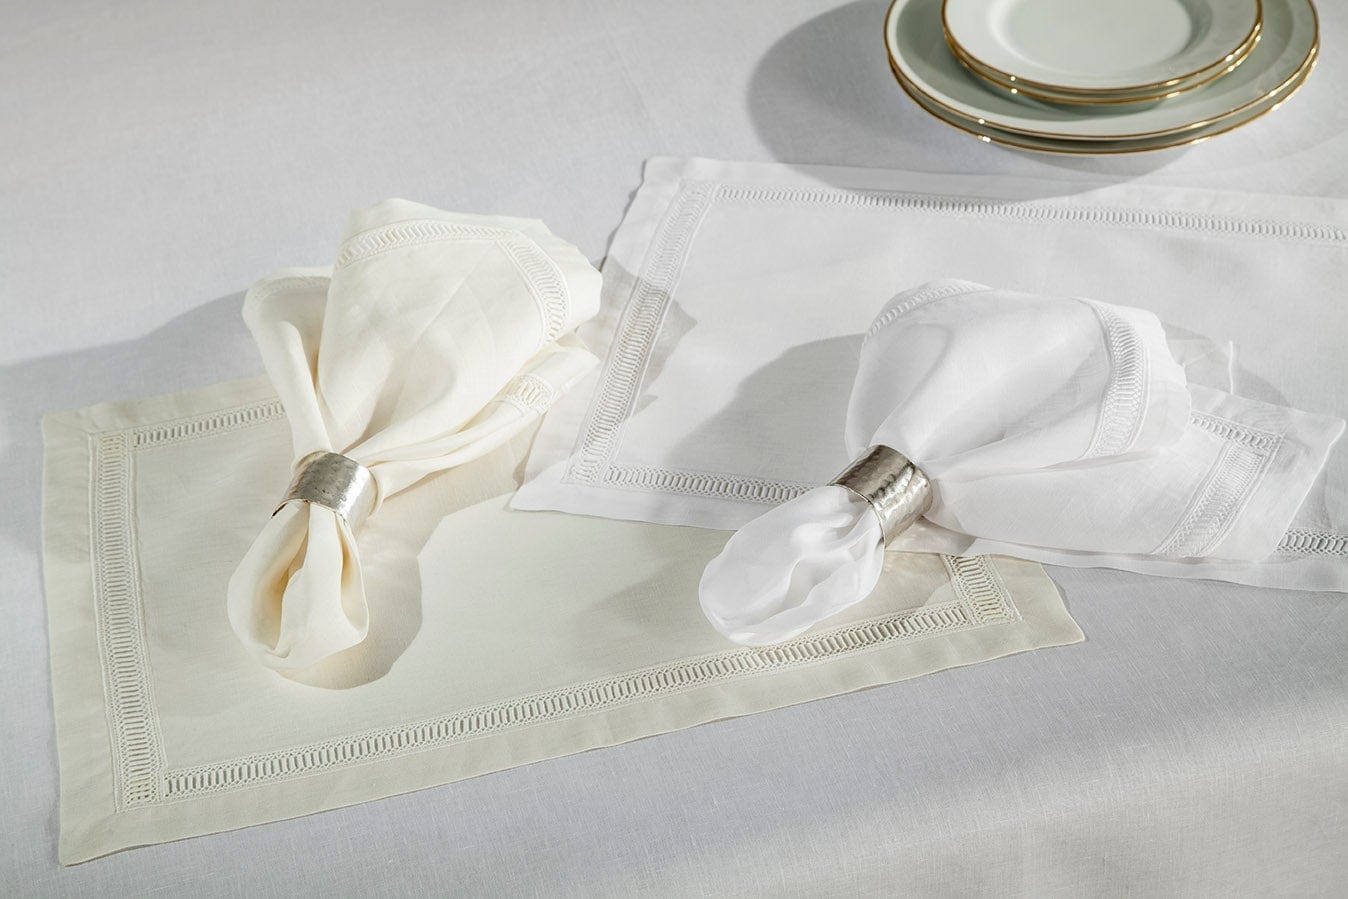 Home Treasures Home Treasures Doric Cocktail Napkins - Set of 6 (Available in 2 Colors)